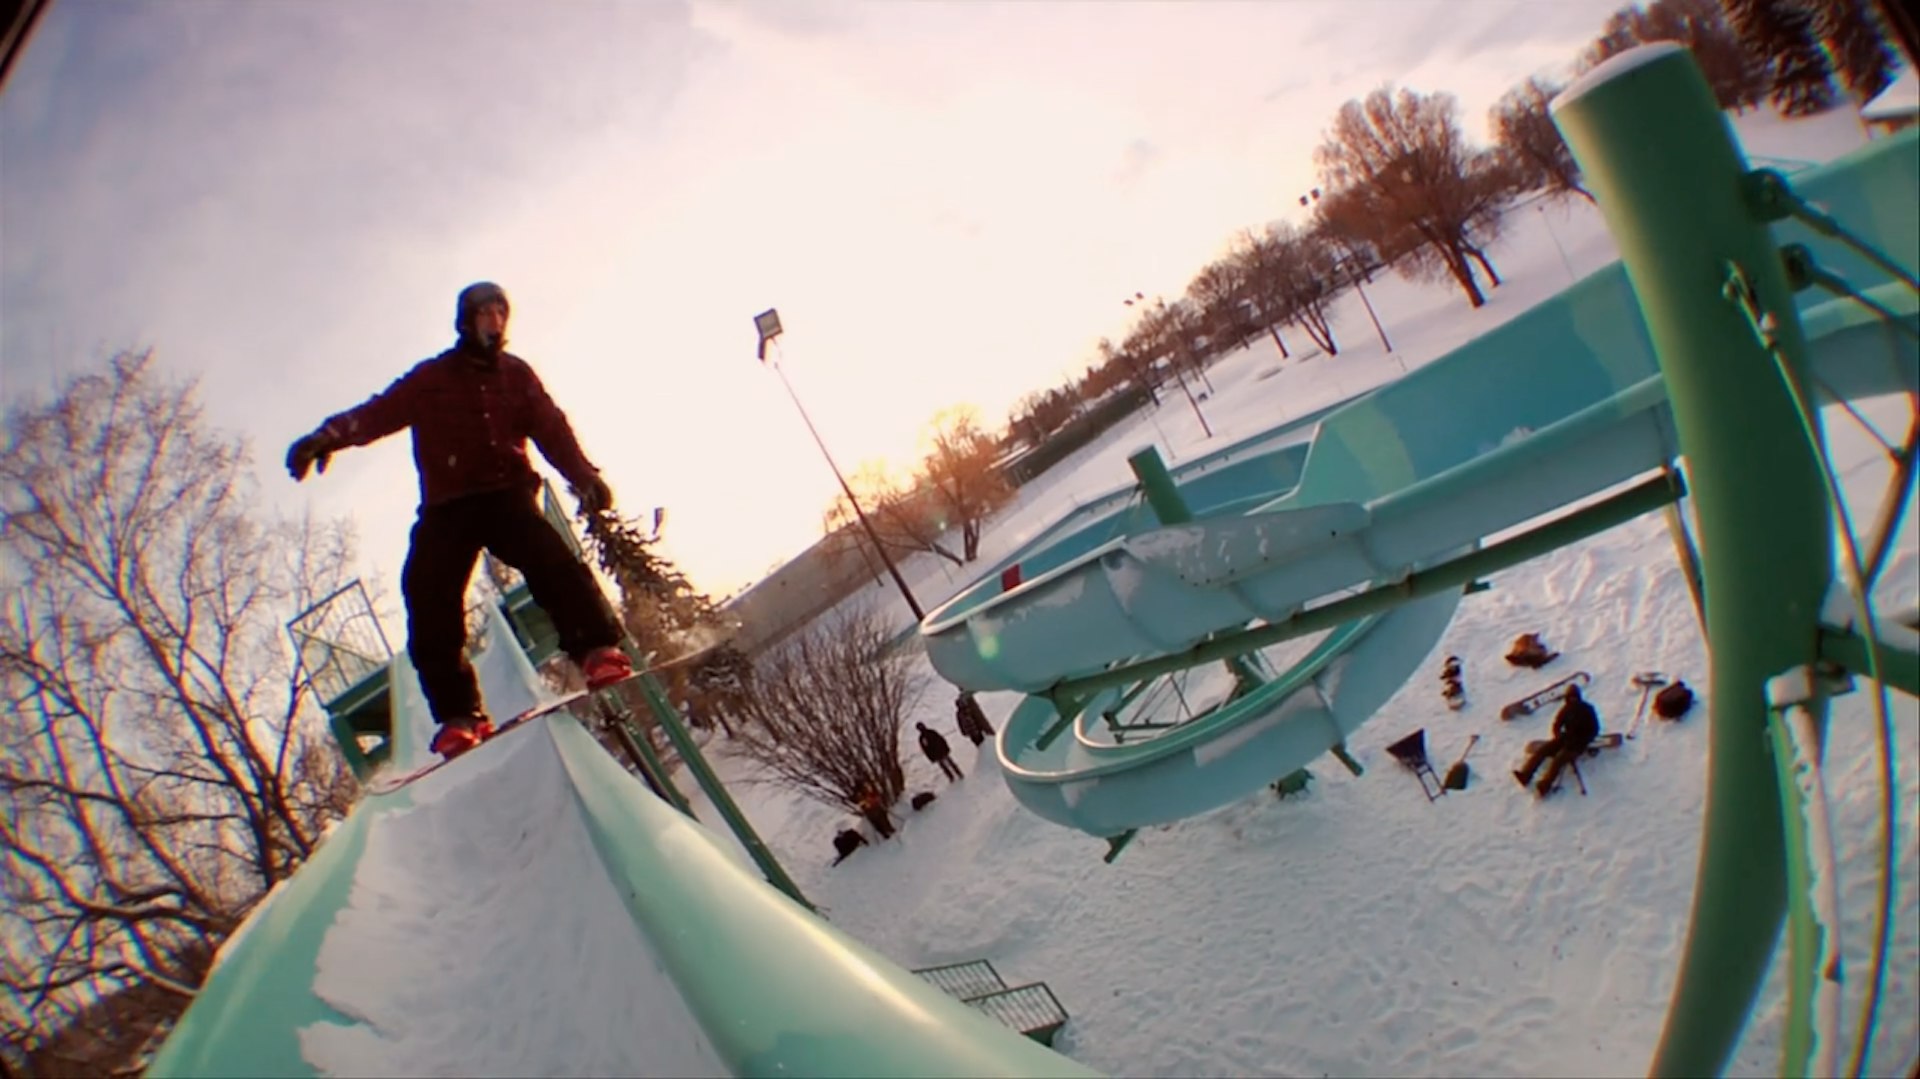 Video: Snowboarder Bode Merrill’s absolutely nuts retrospective